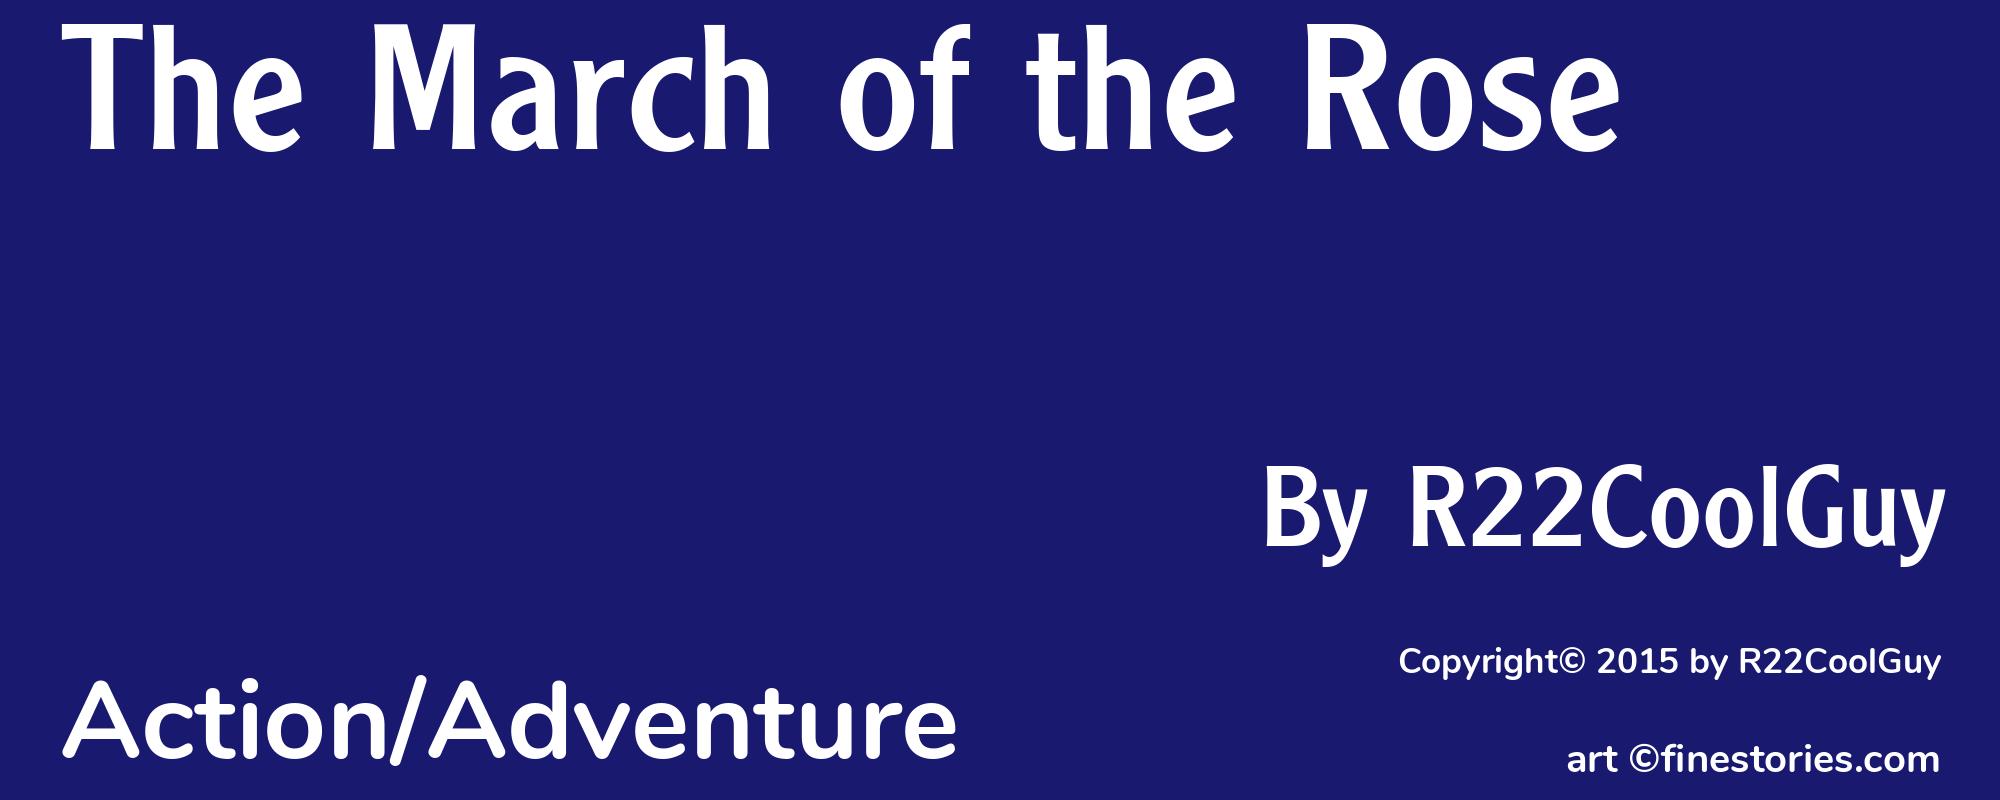 The March of the Rose - Cover